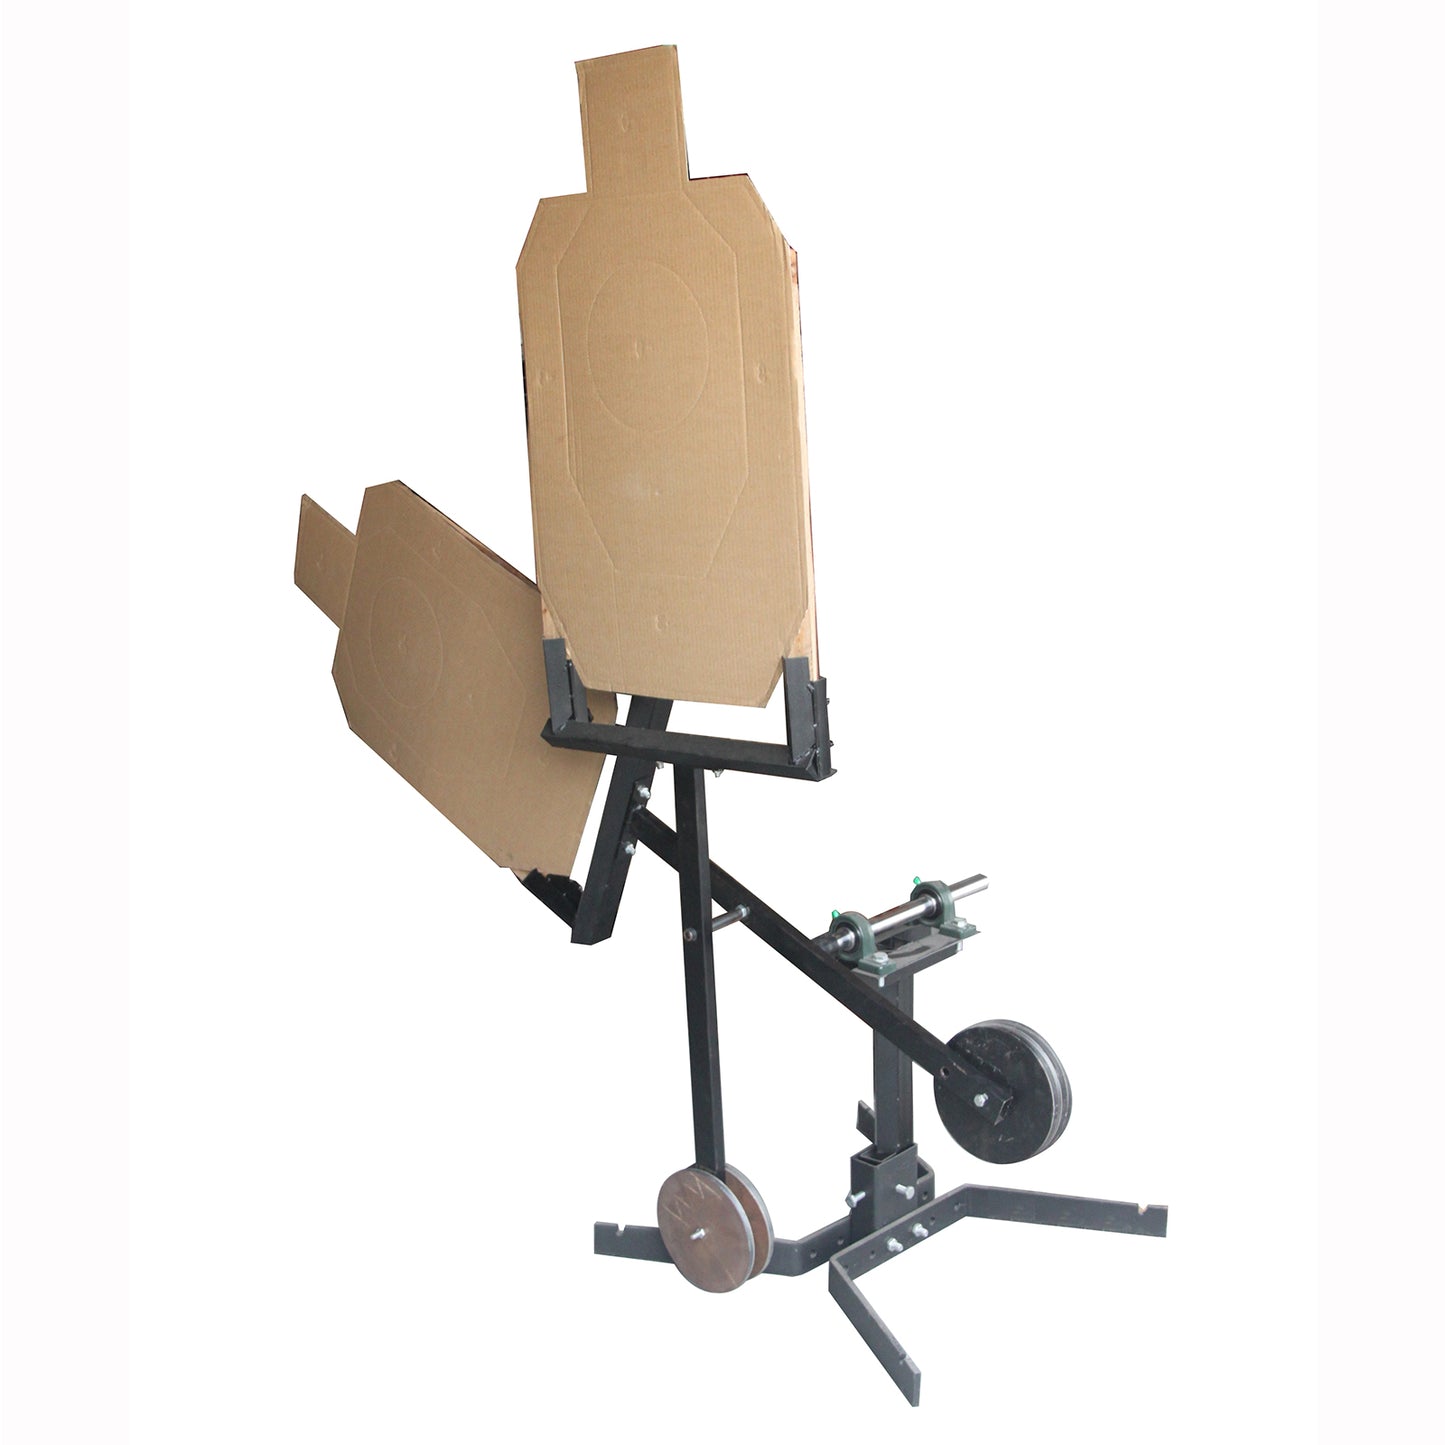 Swing IDPA IPSC Paper Shooting Targets System Metal Stand